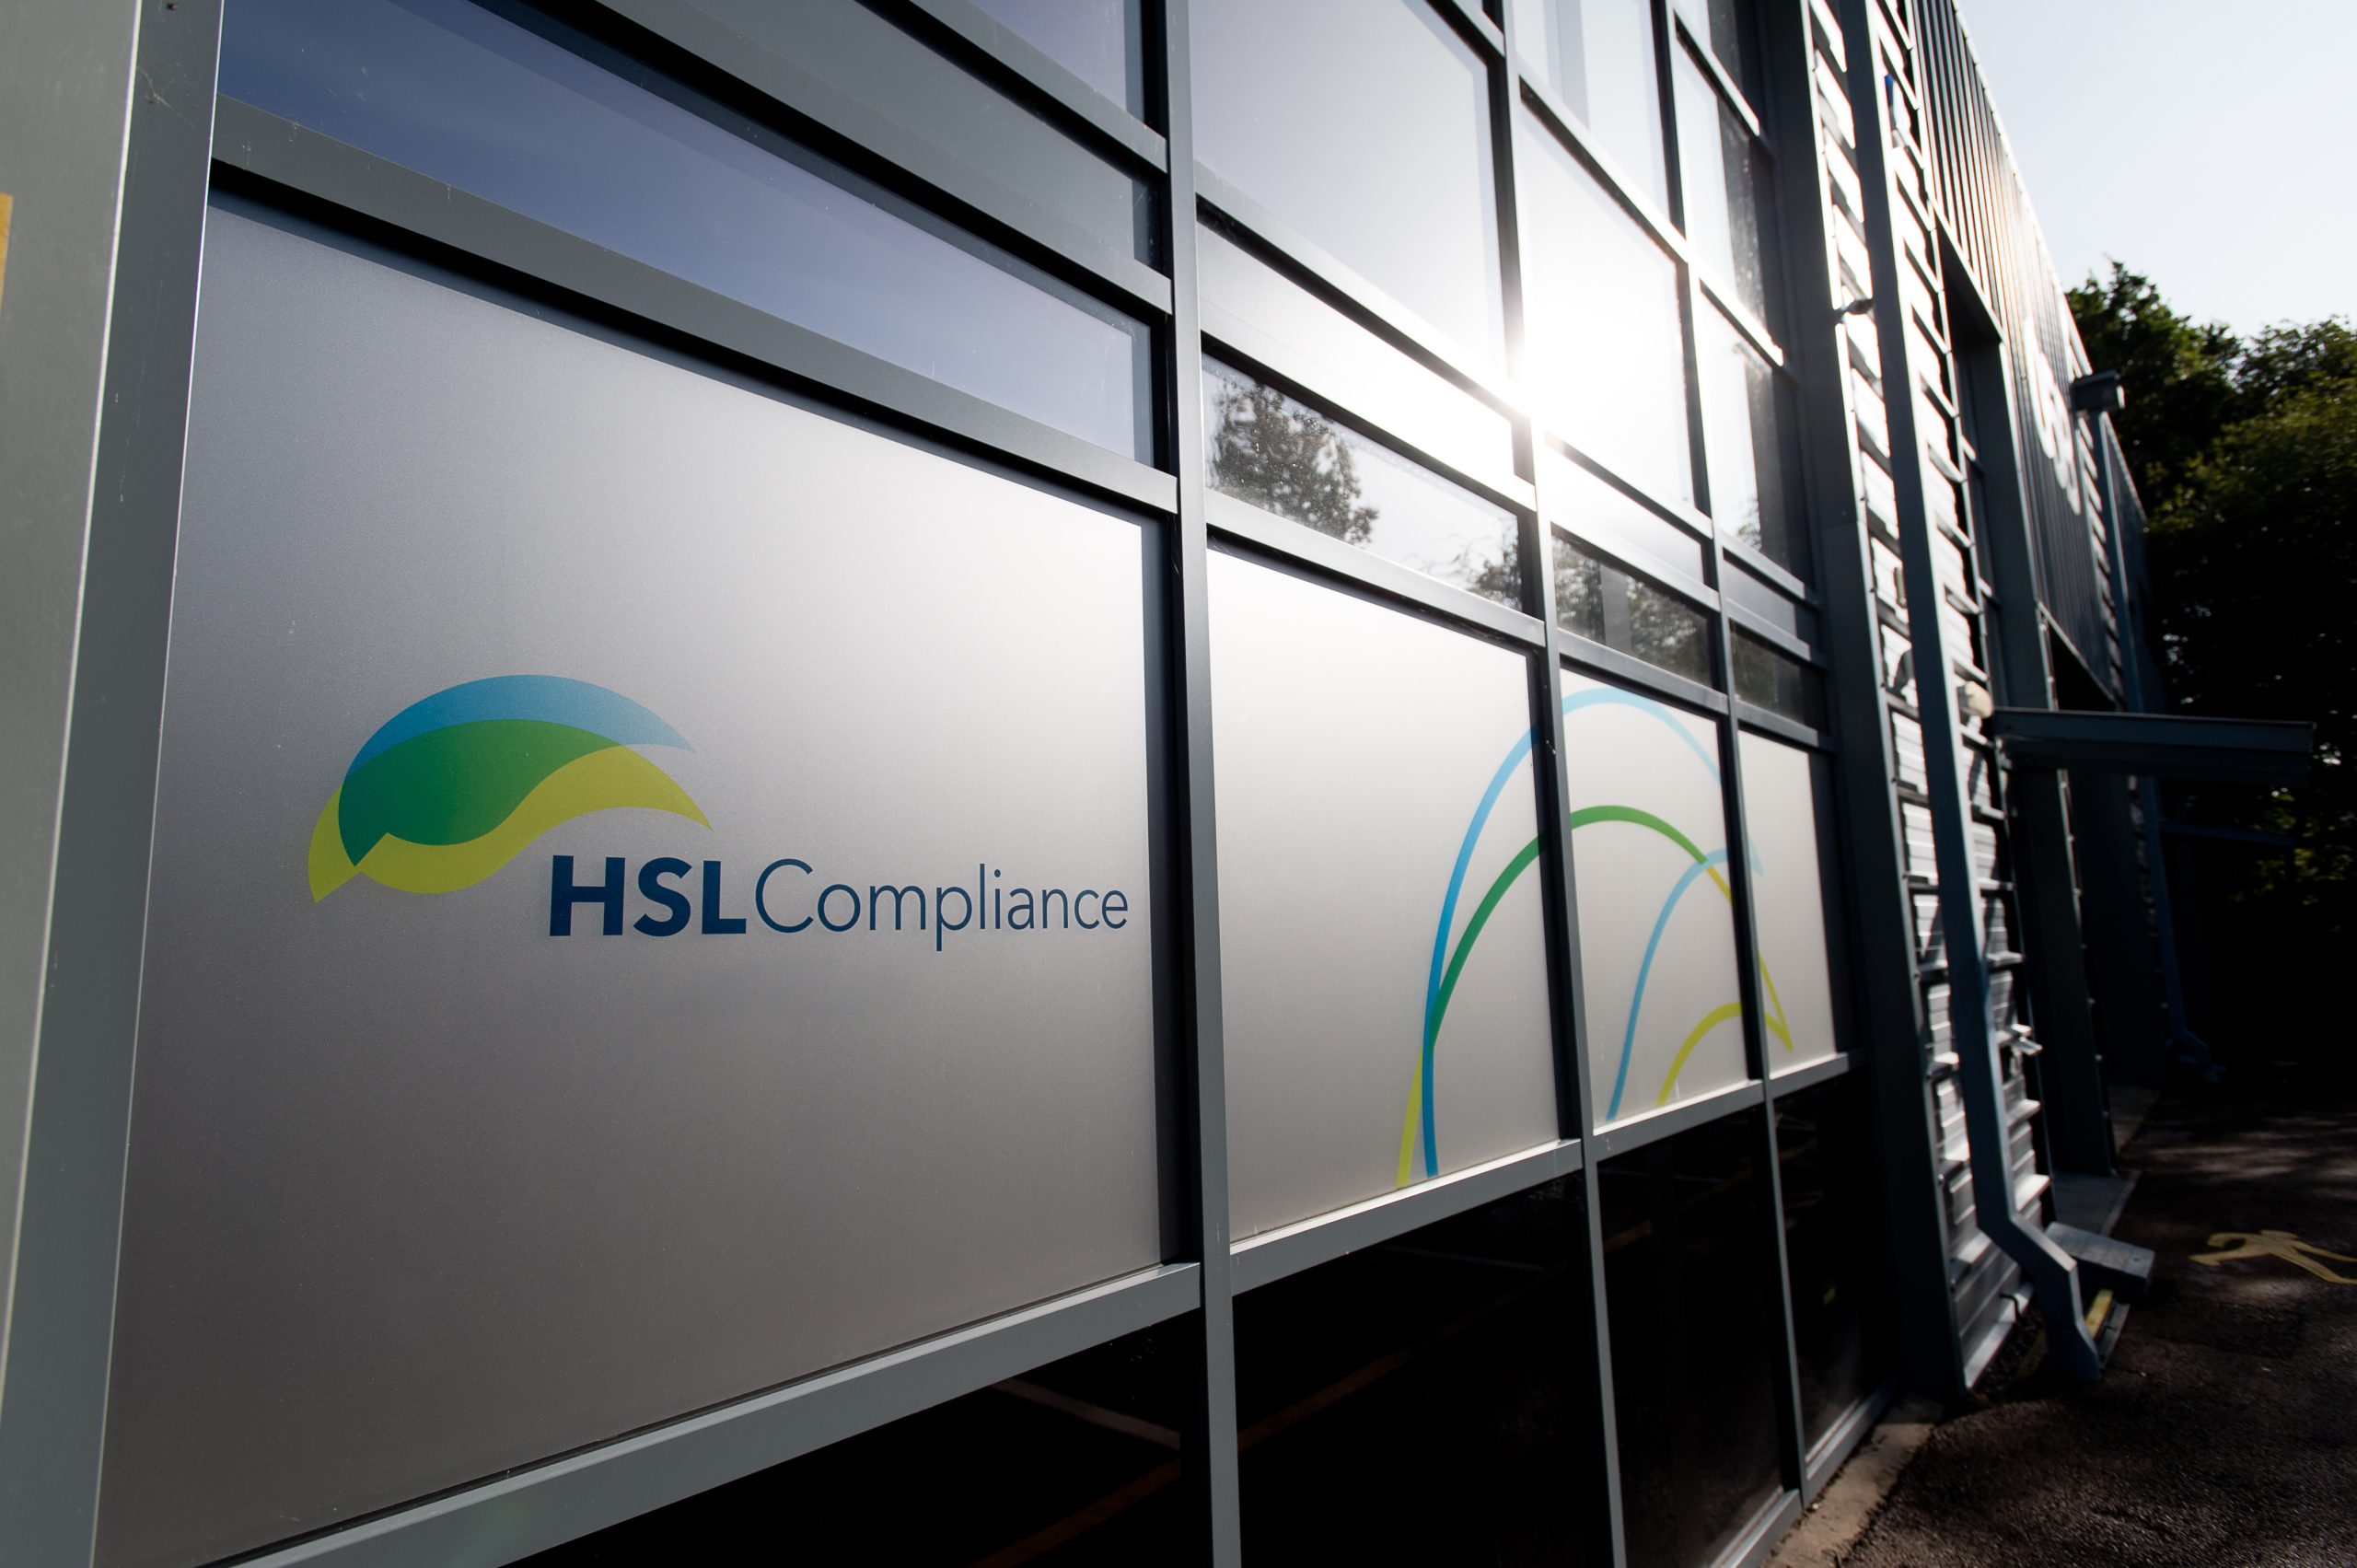 BUSINESS NEWS | Ross-on-Wye based HSL Compliance acquires technology company to enhance its market-leading water safety services